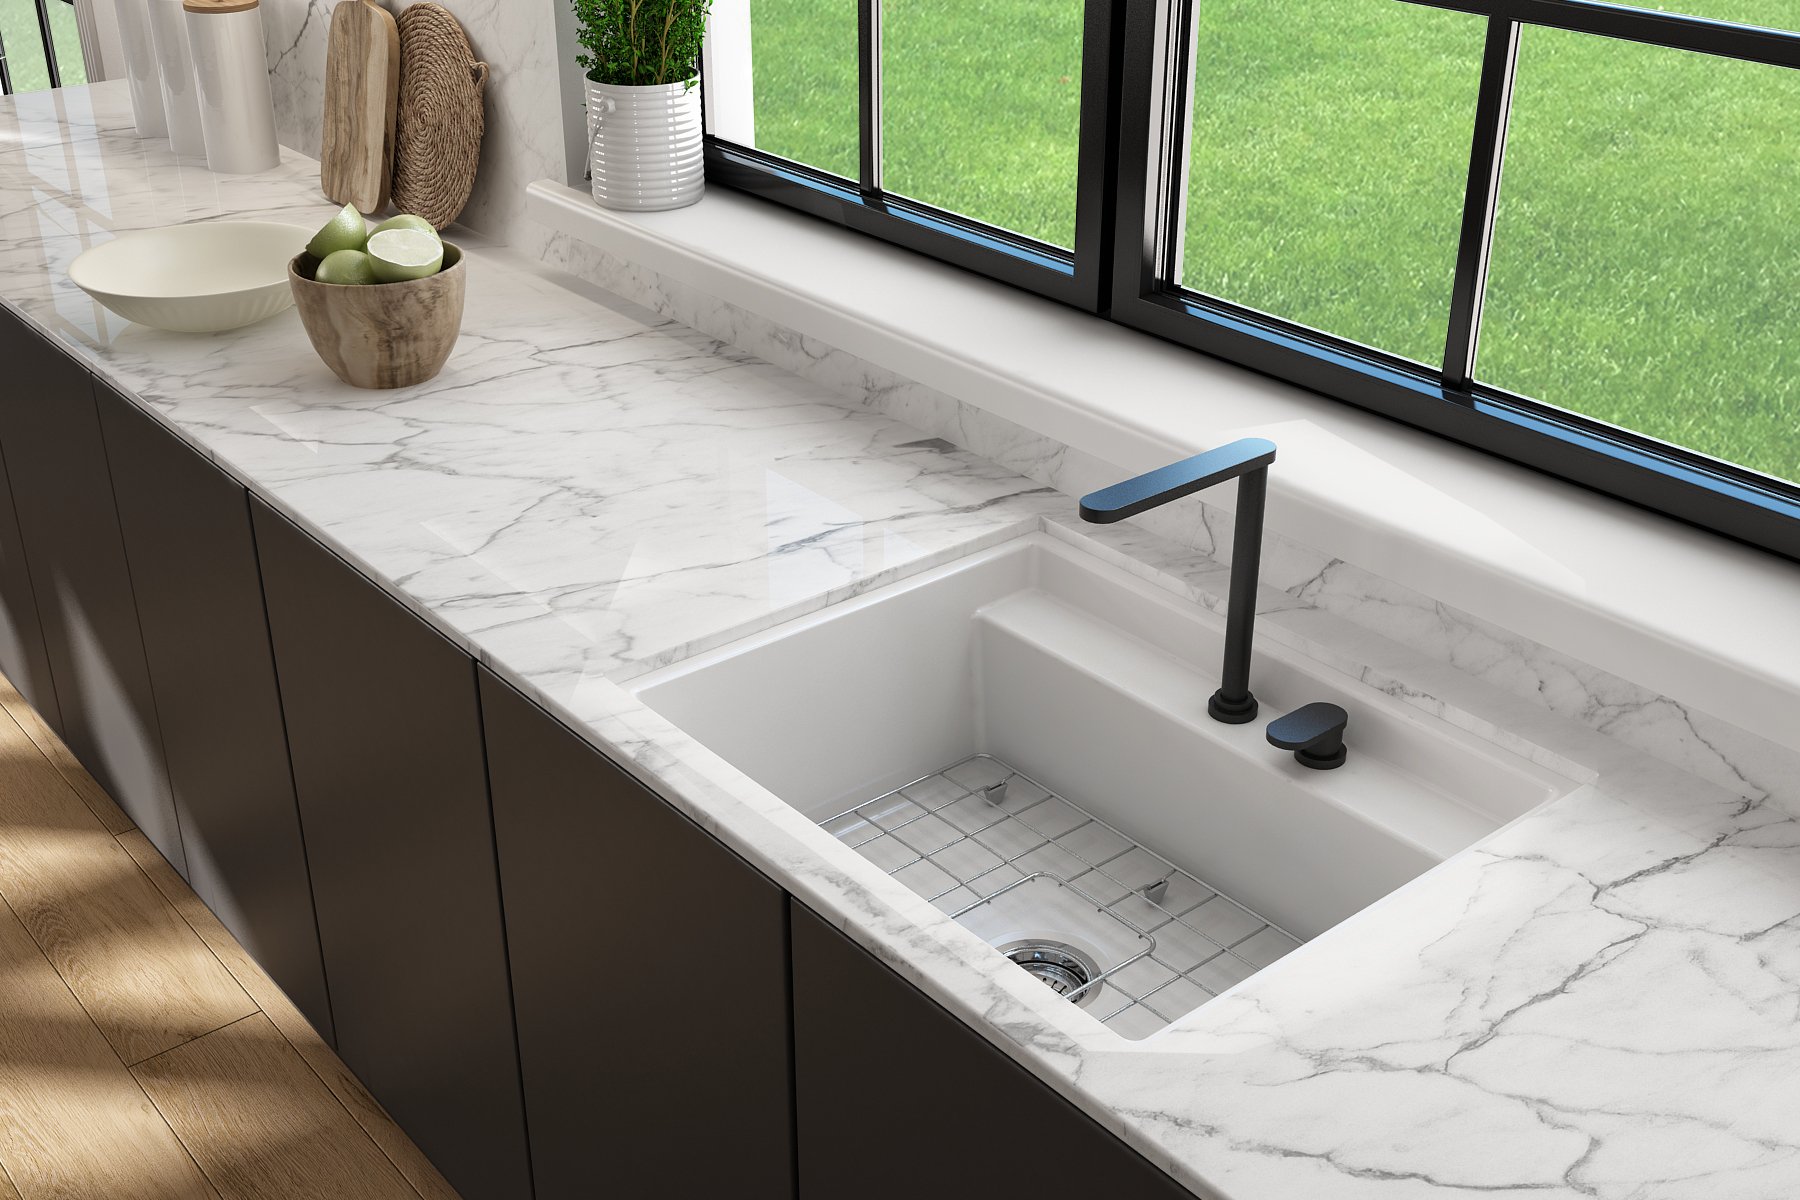 BAVENO 27 with Covers (2-hole faucet setting)